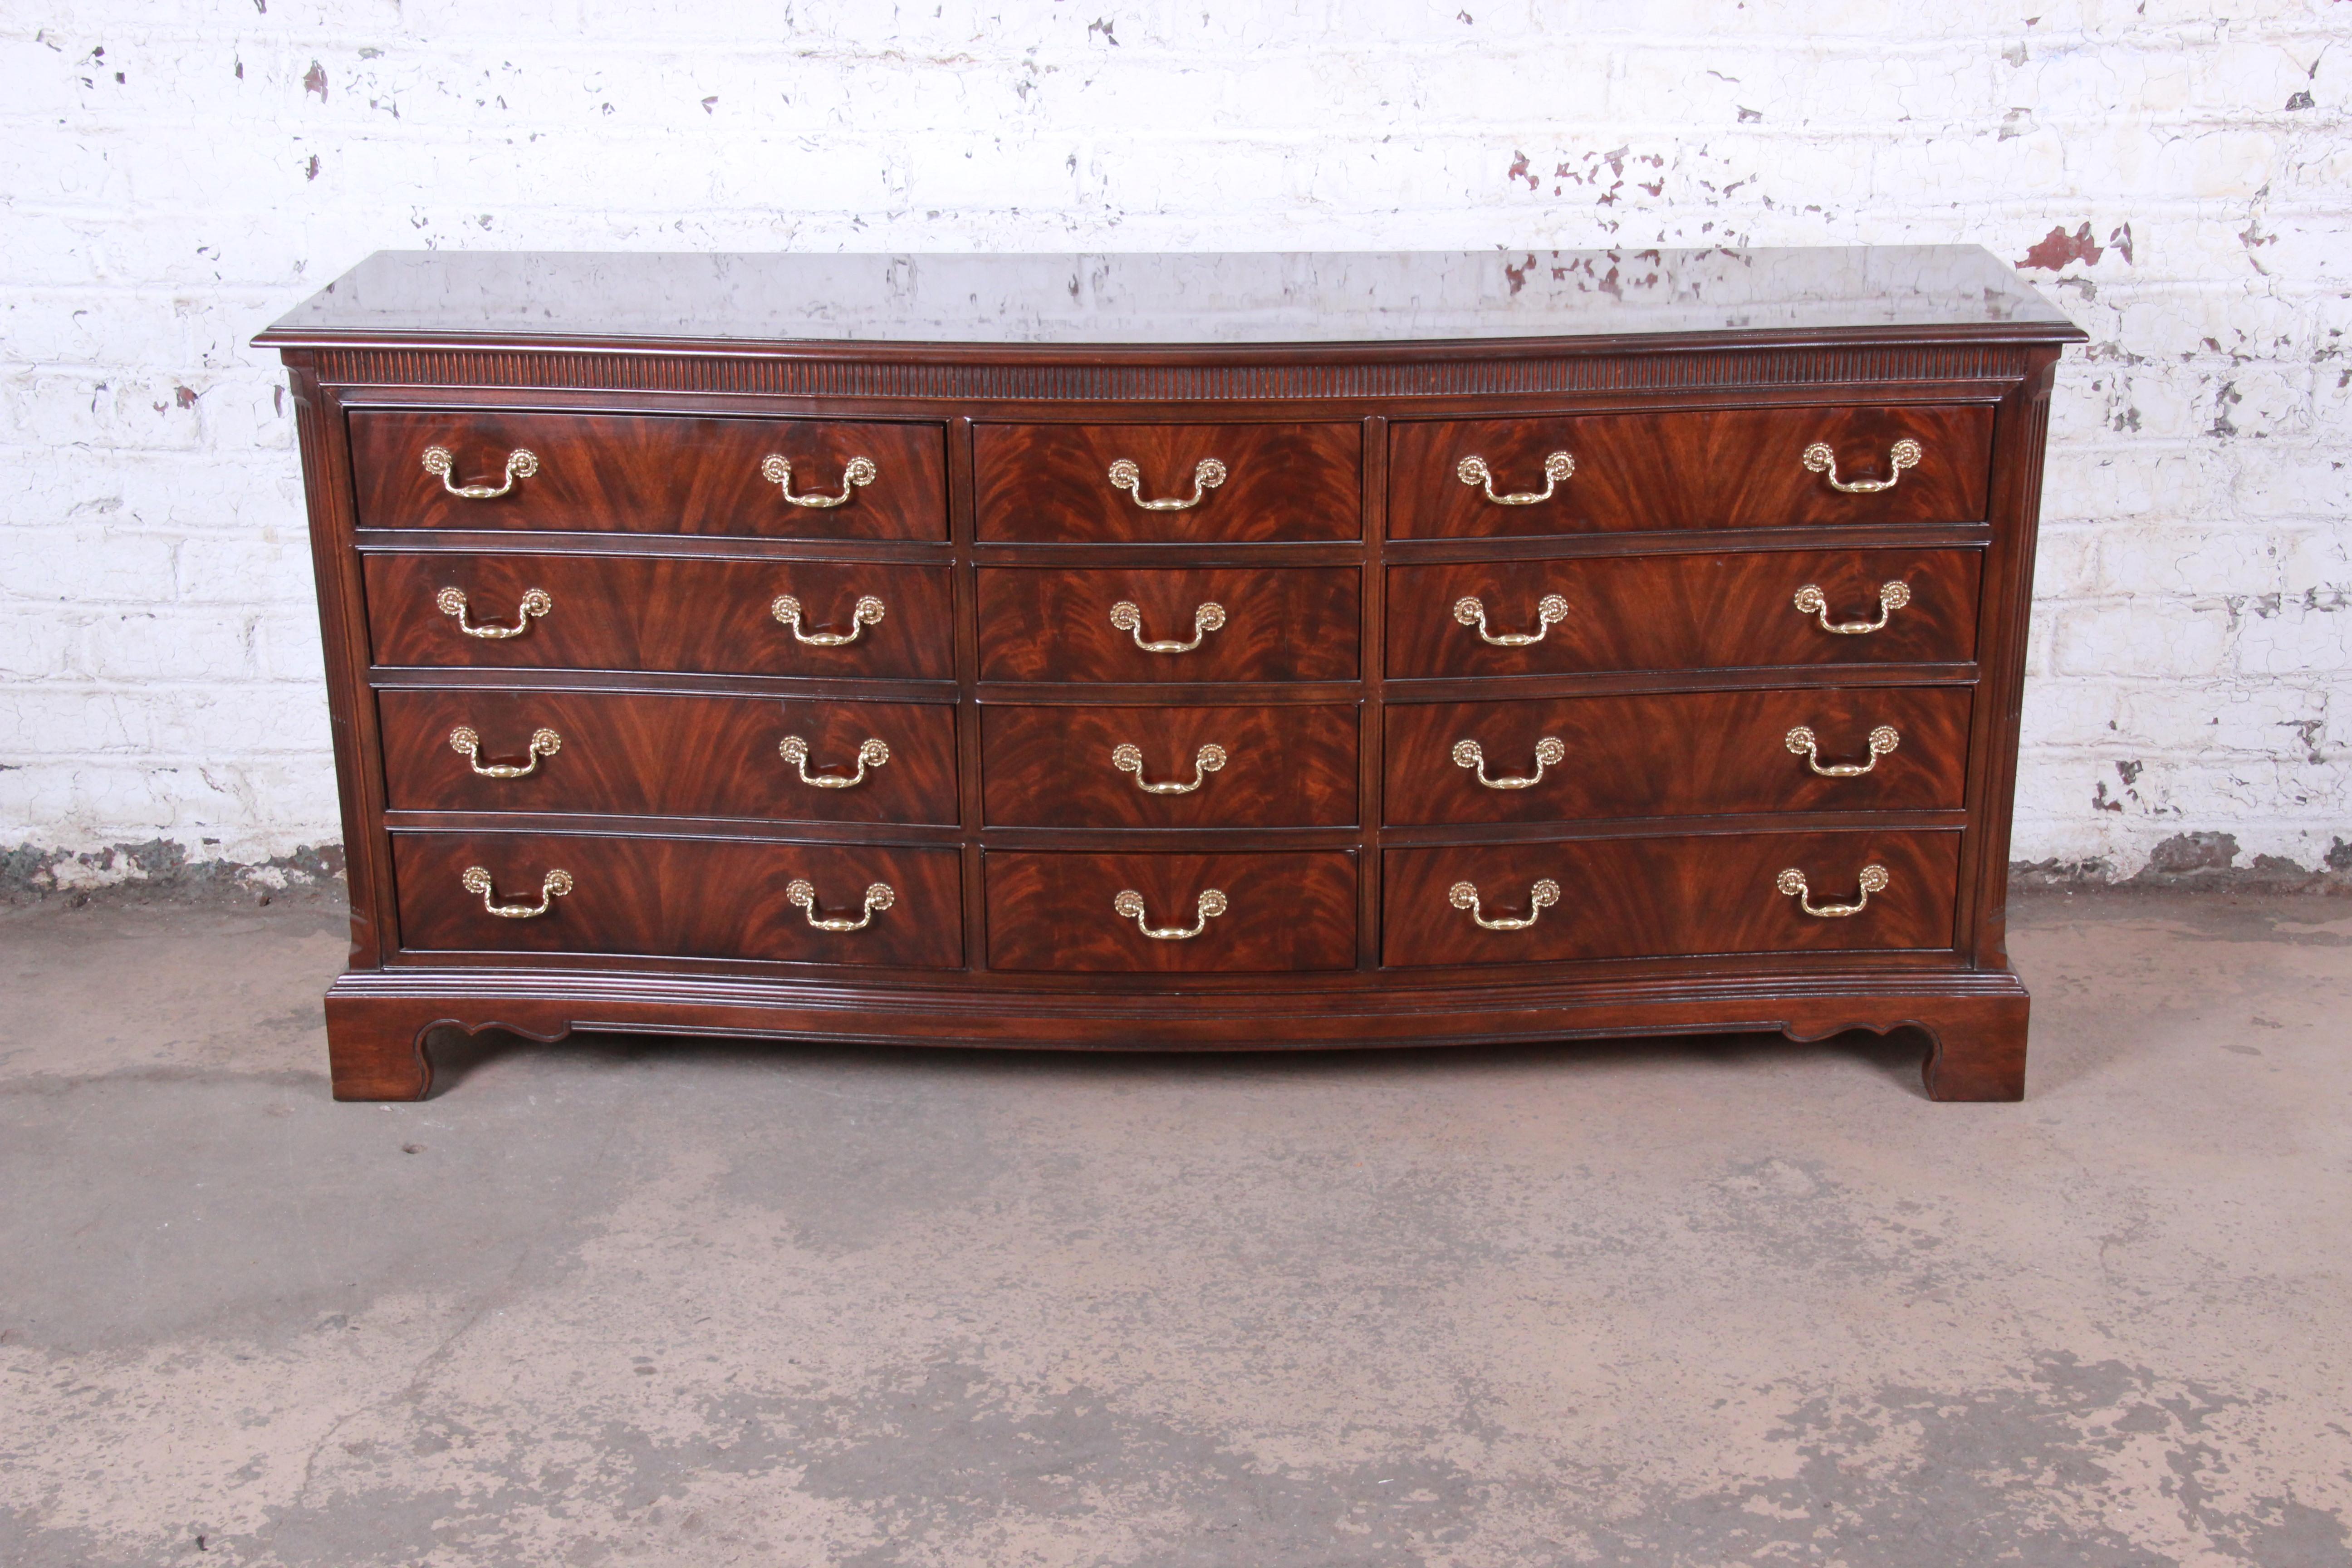 An exceptional Georgian flame mahogany twelve drawer triple dresser or credenza

By Drexel Heritage 